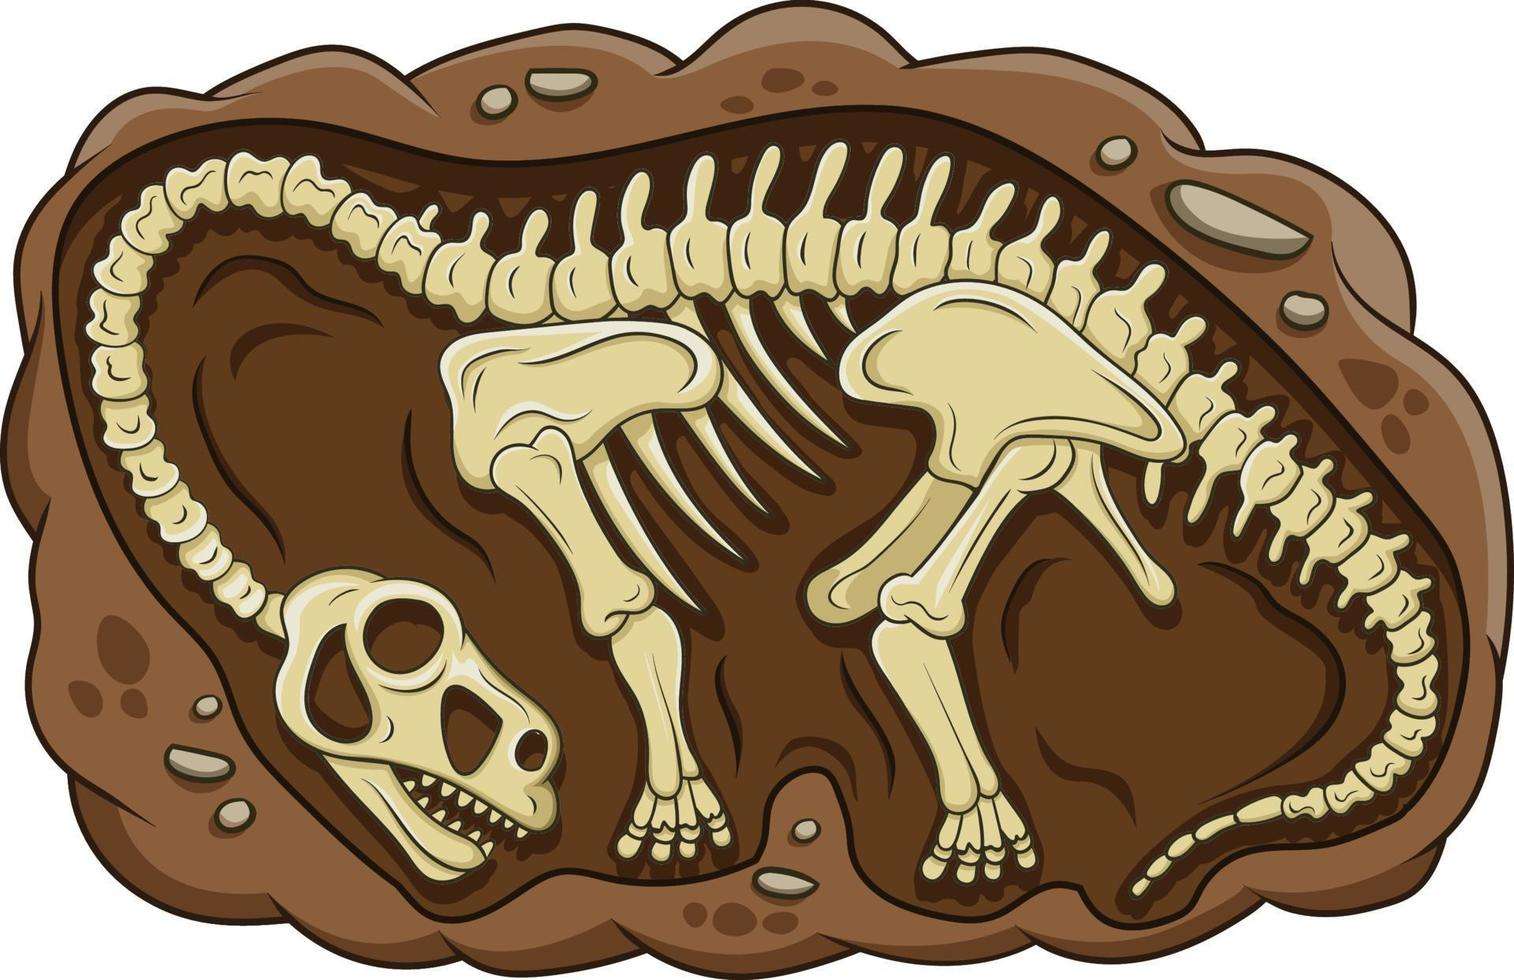 Fossile 1 puzzle online